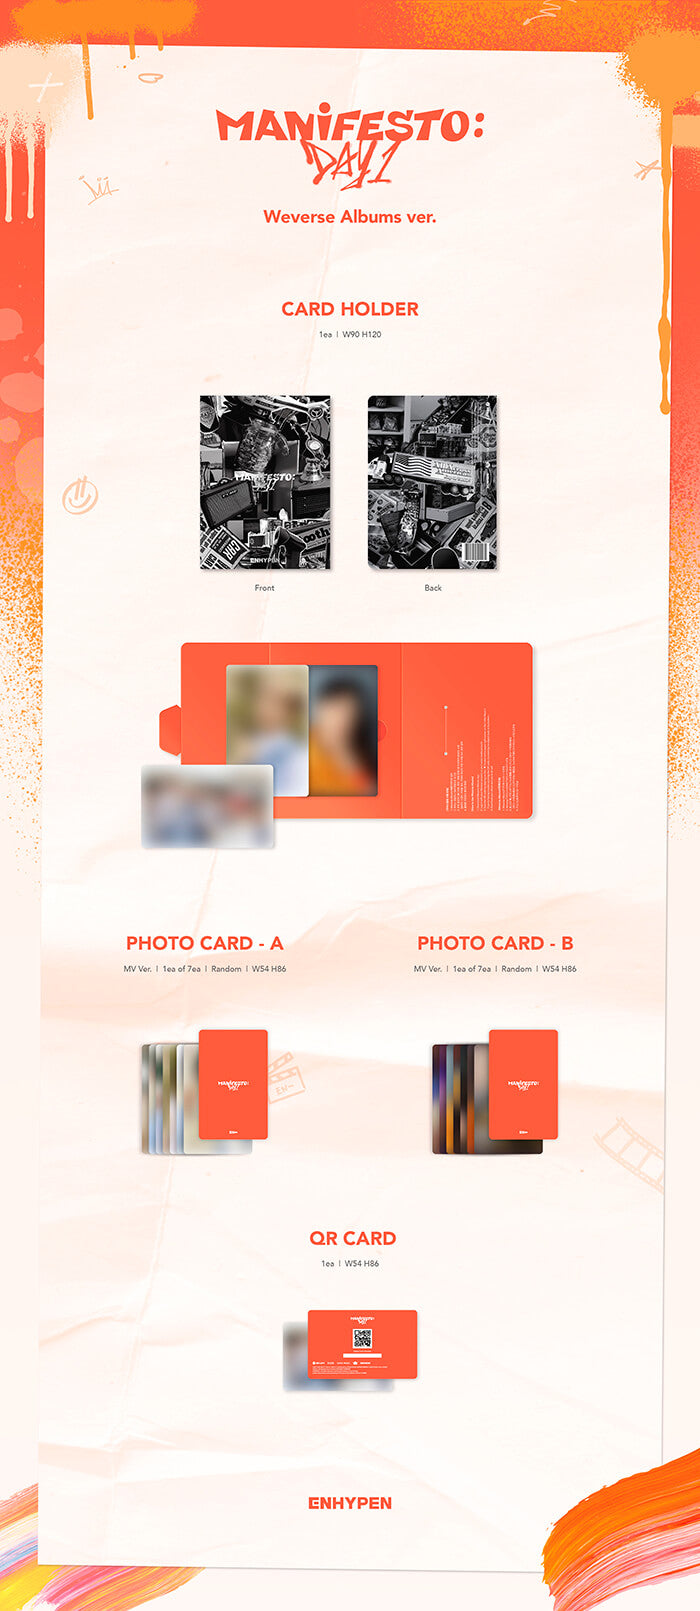 ENHYPEN MANIFESTO: DAY 1 - Weverse Albums Version Inclusions Card Holder Photocard QR Card